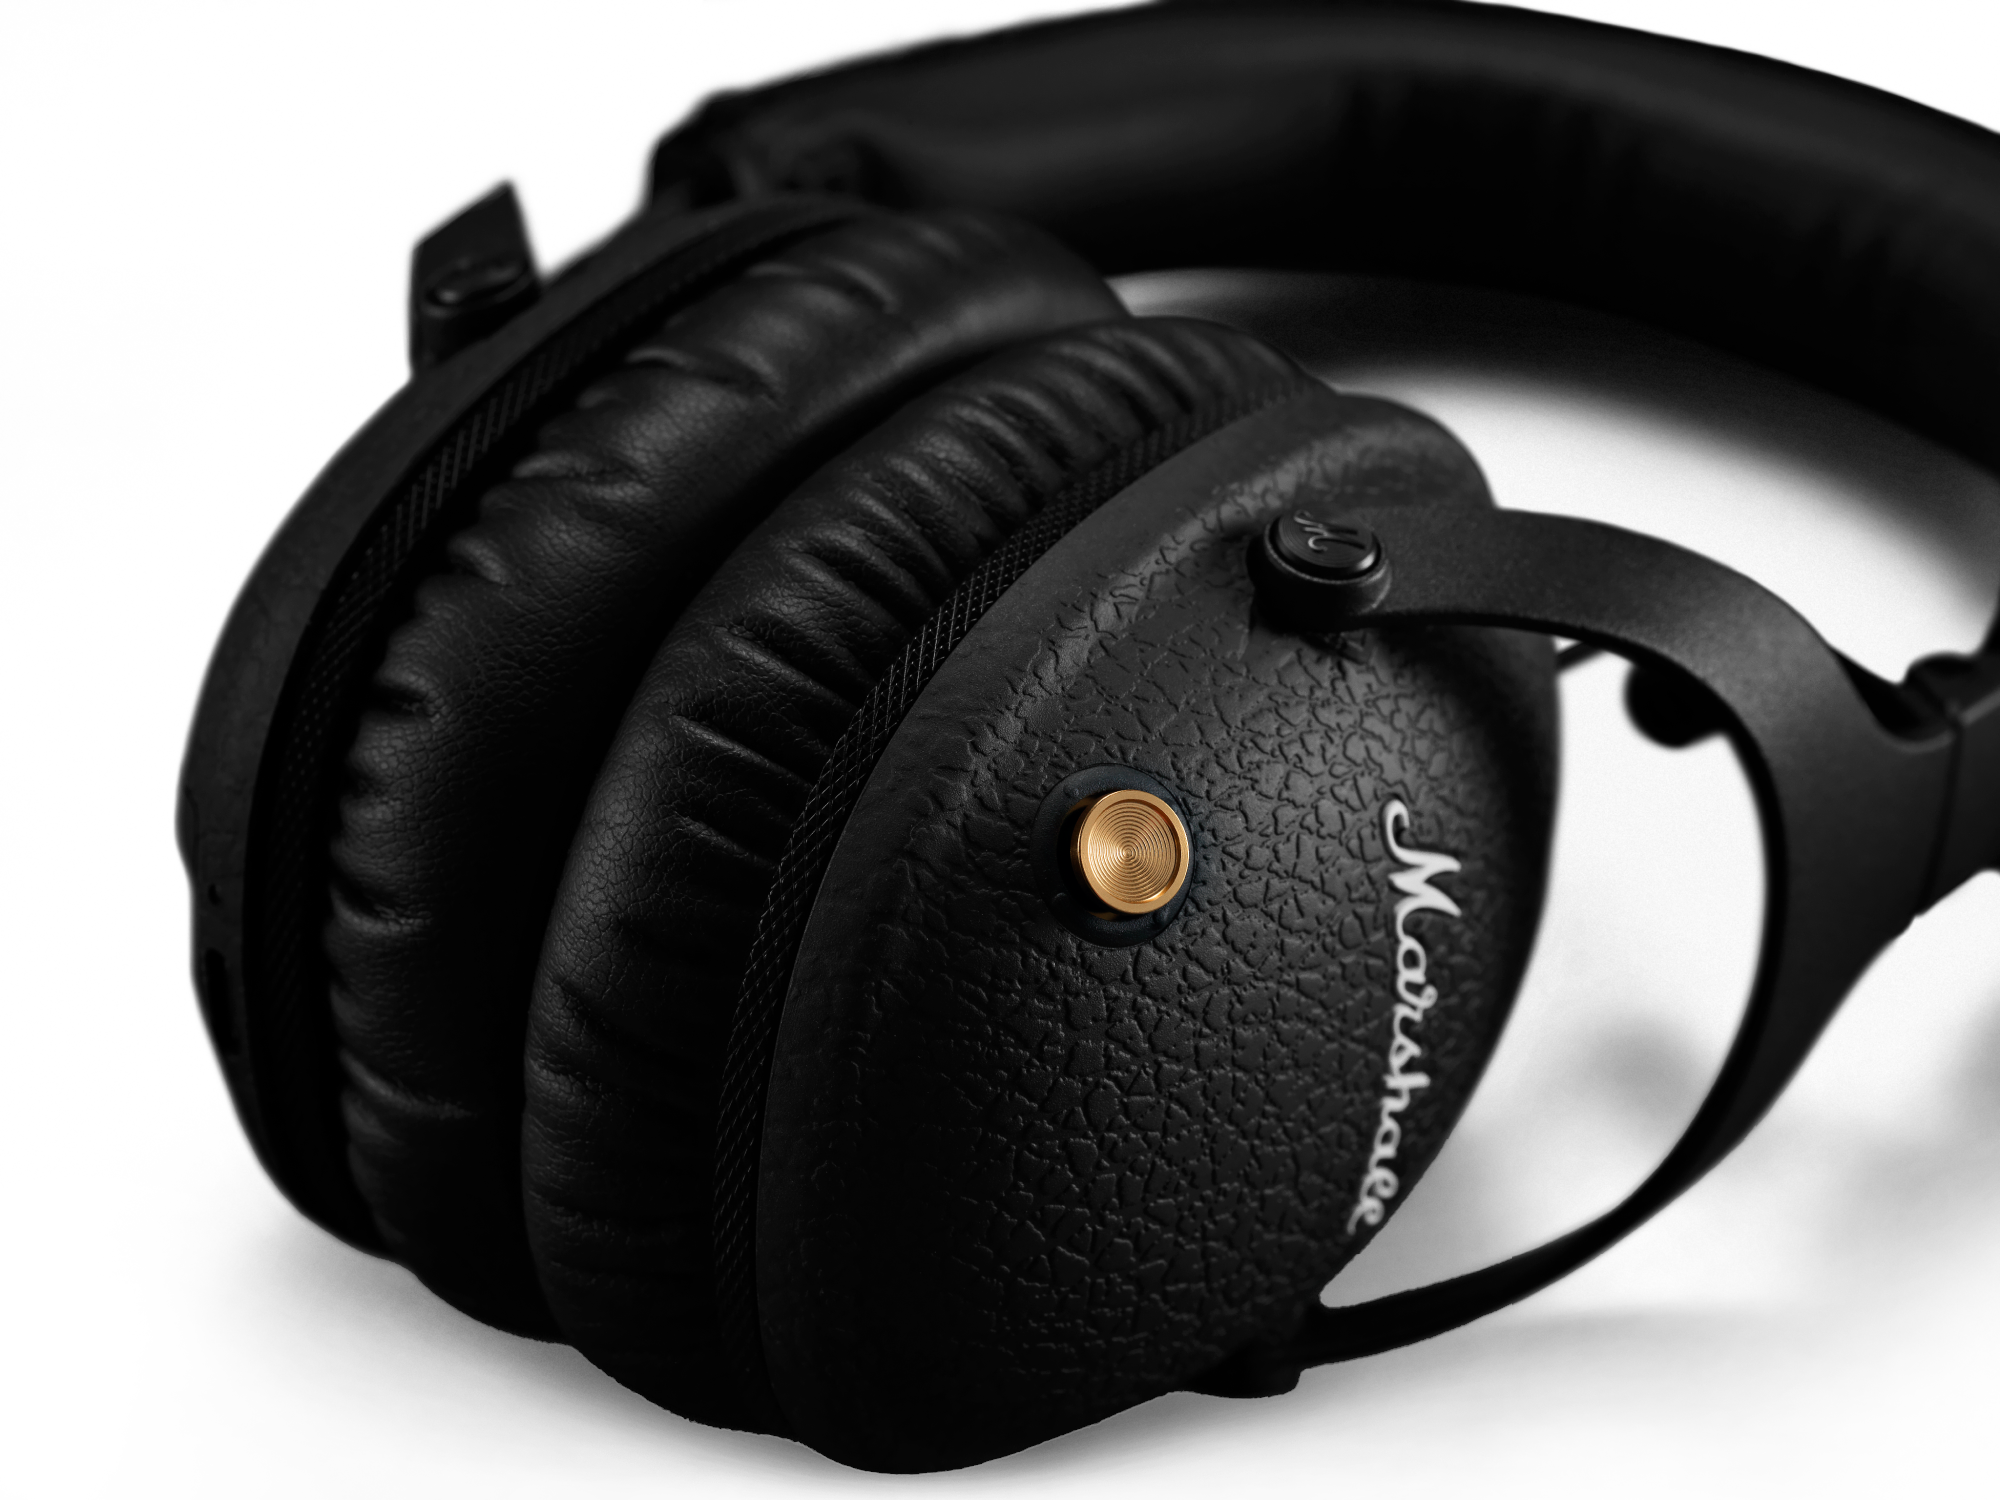 A pair of black Marshall MONITOR II ANC headphones on a black background.